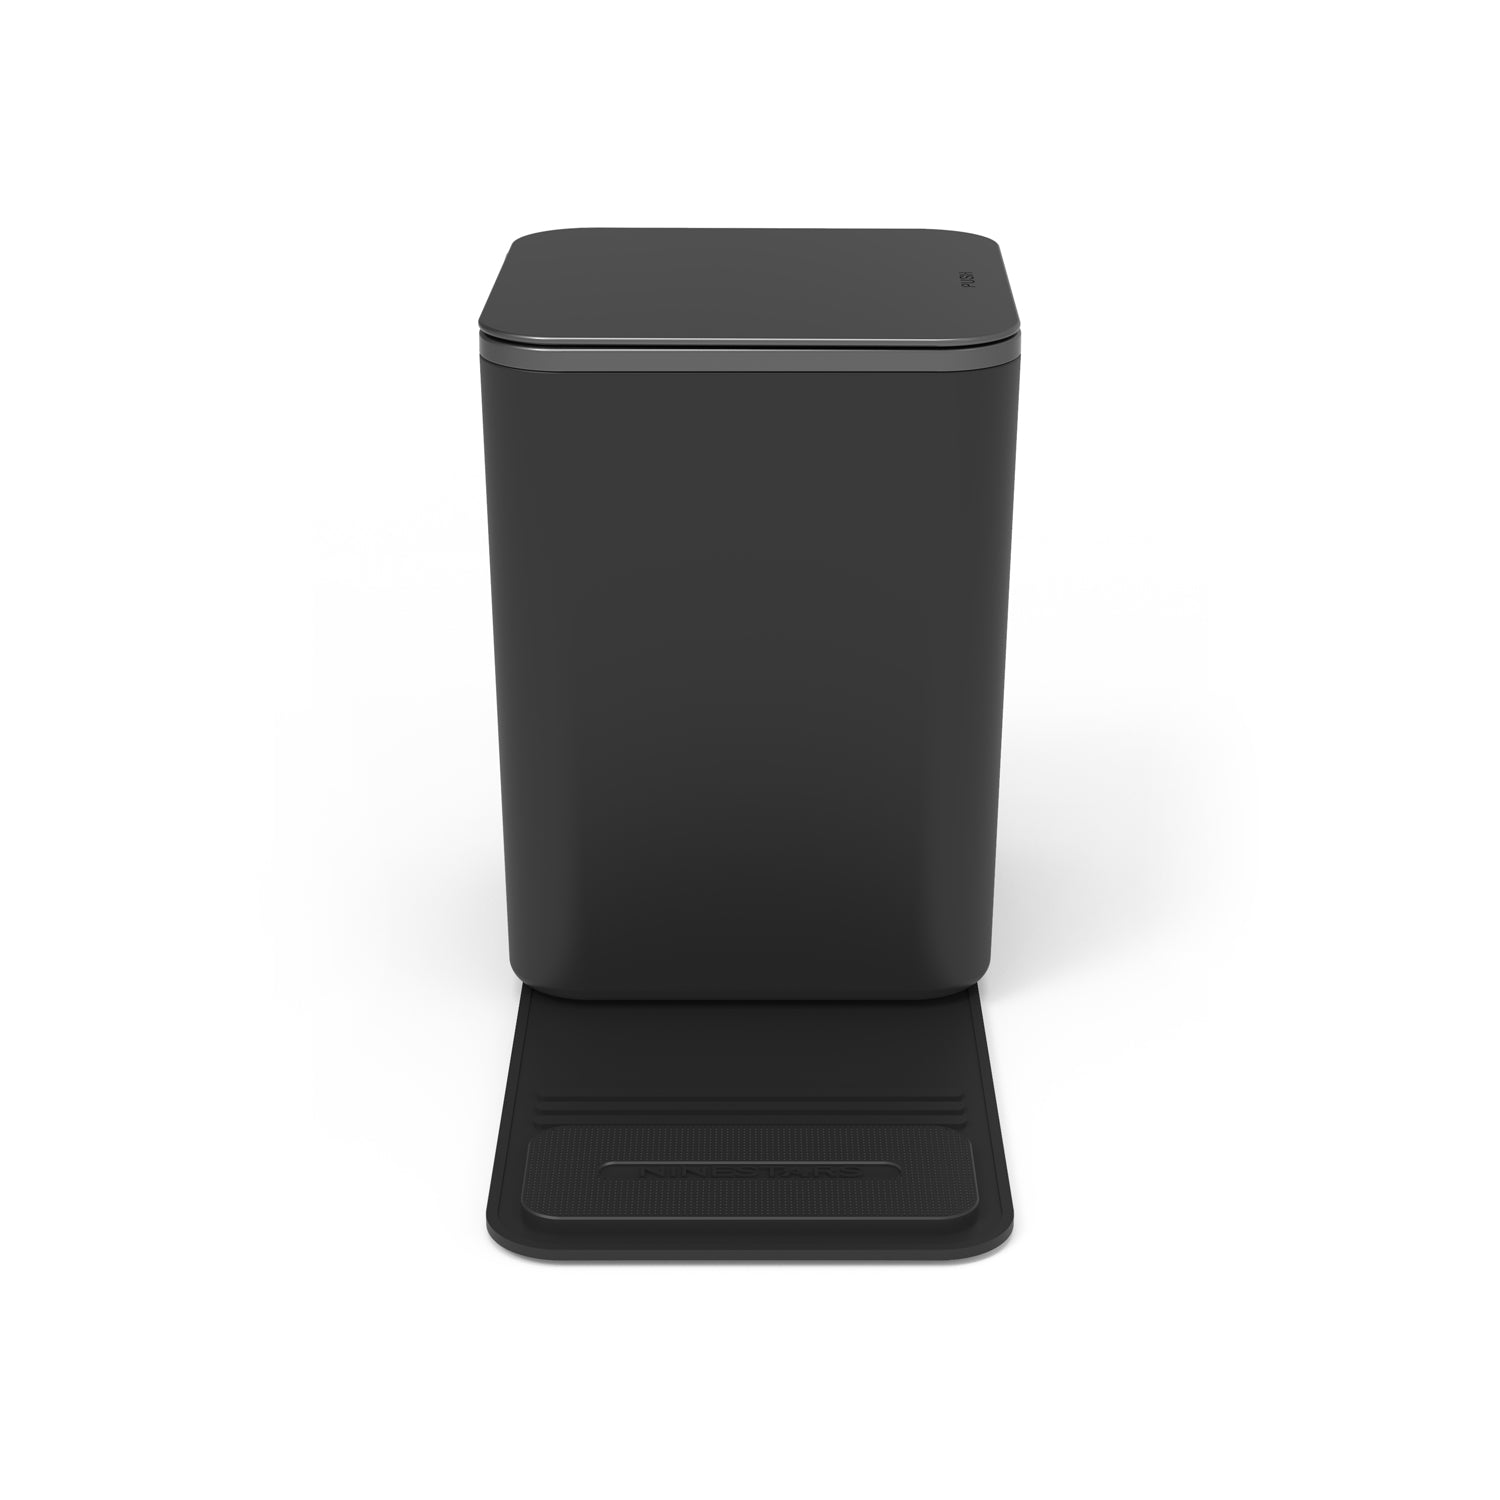 Black Garbage Can for Your Car. Trash Can to keep car clean